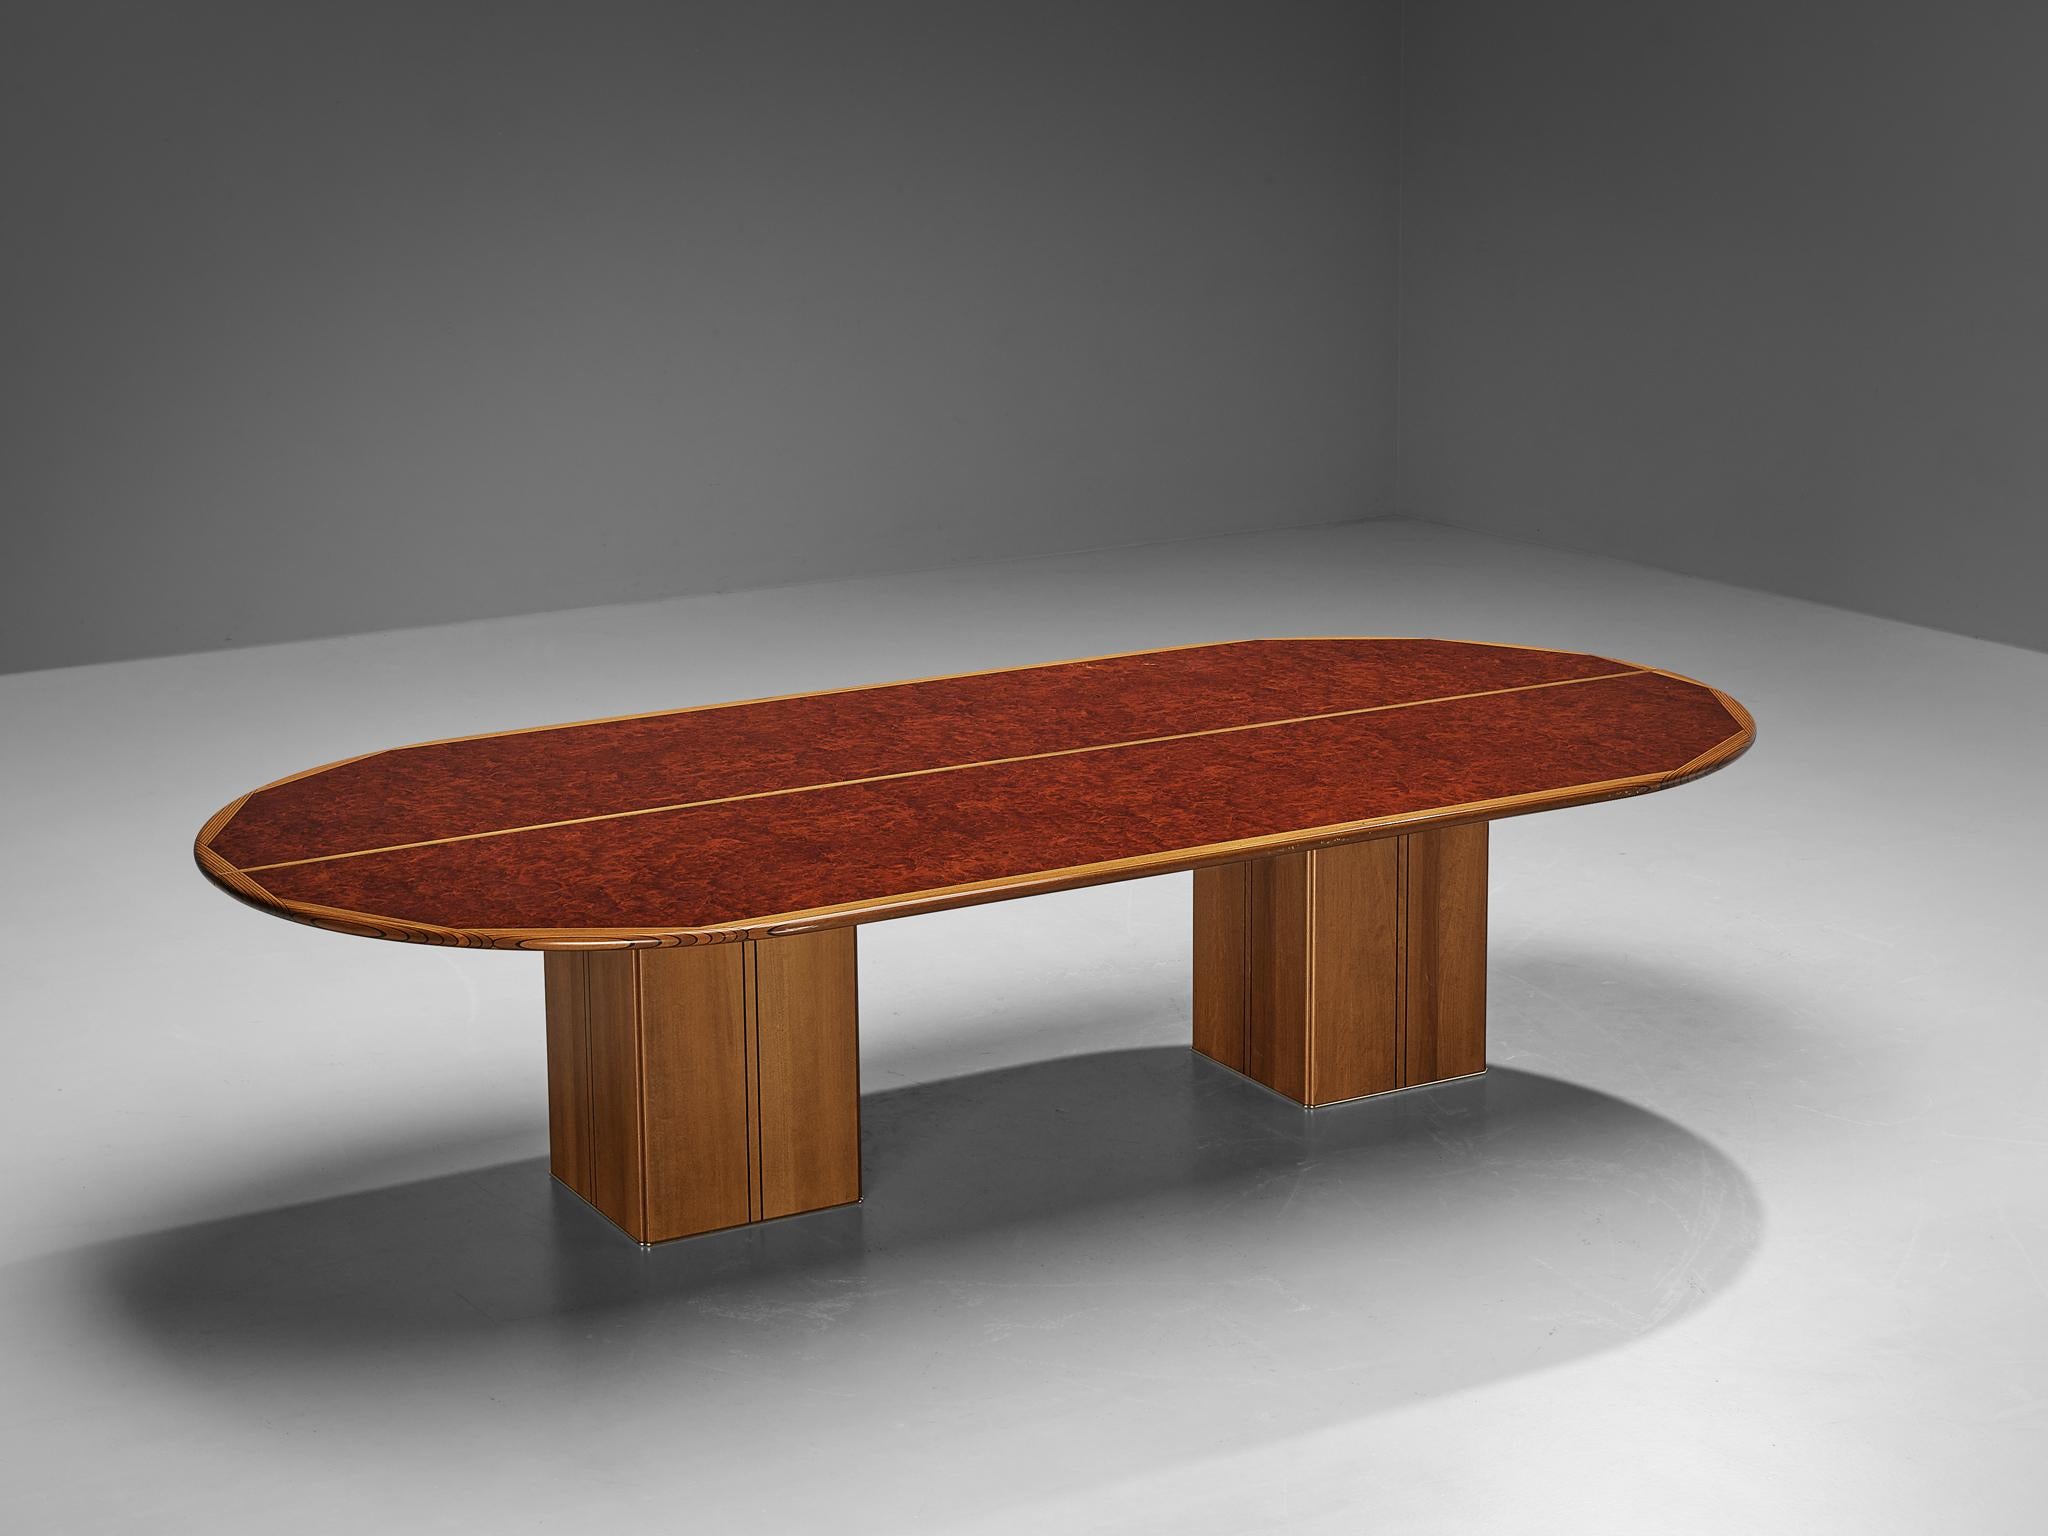 Afra & Tobia Scarpa for Maxalto, large oval dining table model ‘Artona’, walnut, walnut burl, ebony, brass, Italy, 1975/1979

Intriguing table designed by Afra and Tobia Scarpa. On two squared pedestal base rests an oval tabletop. The top shows